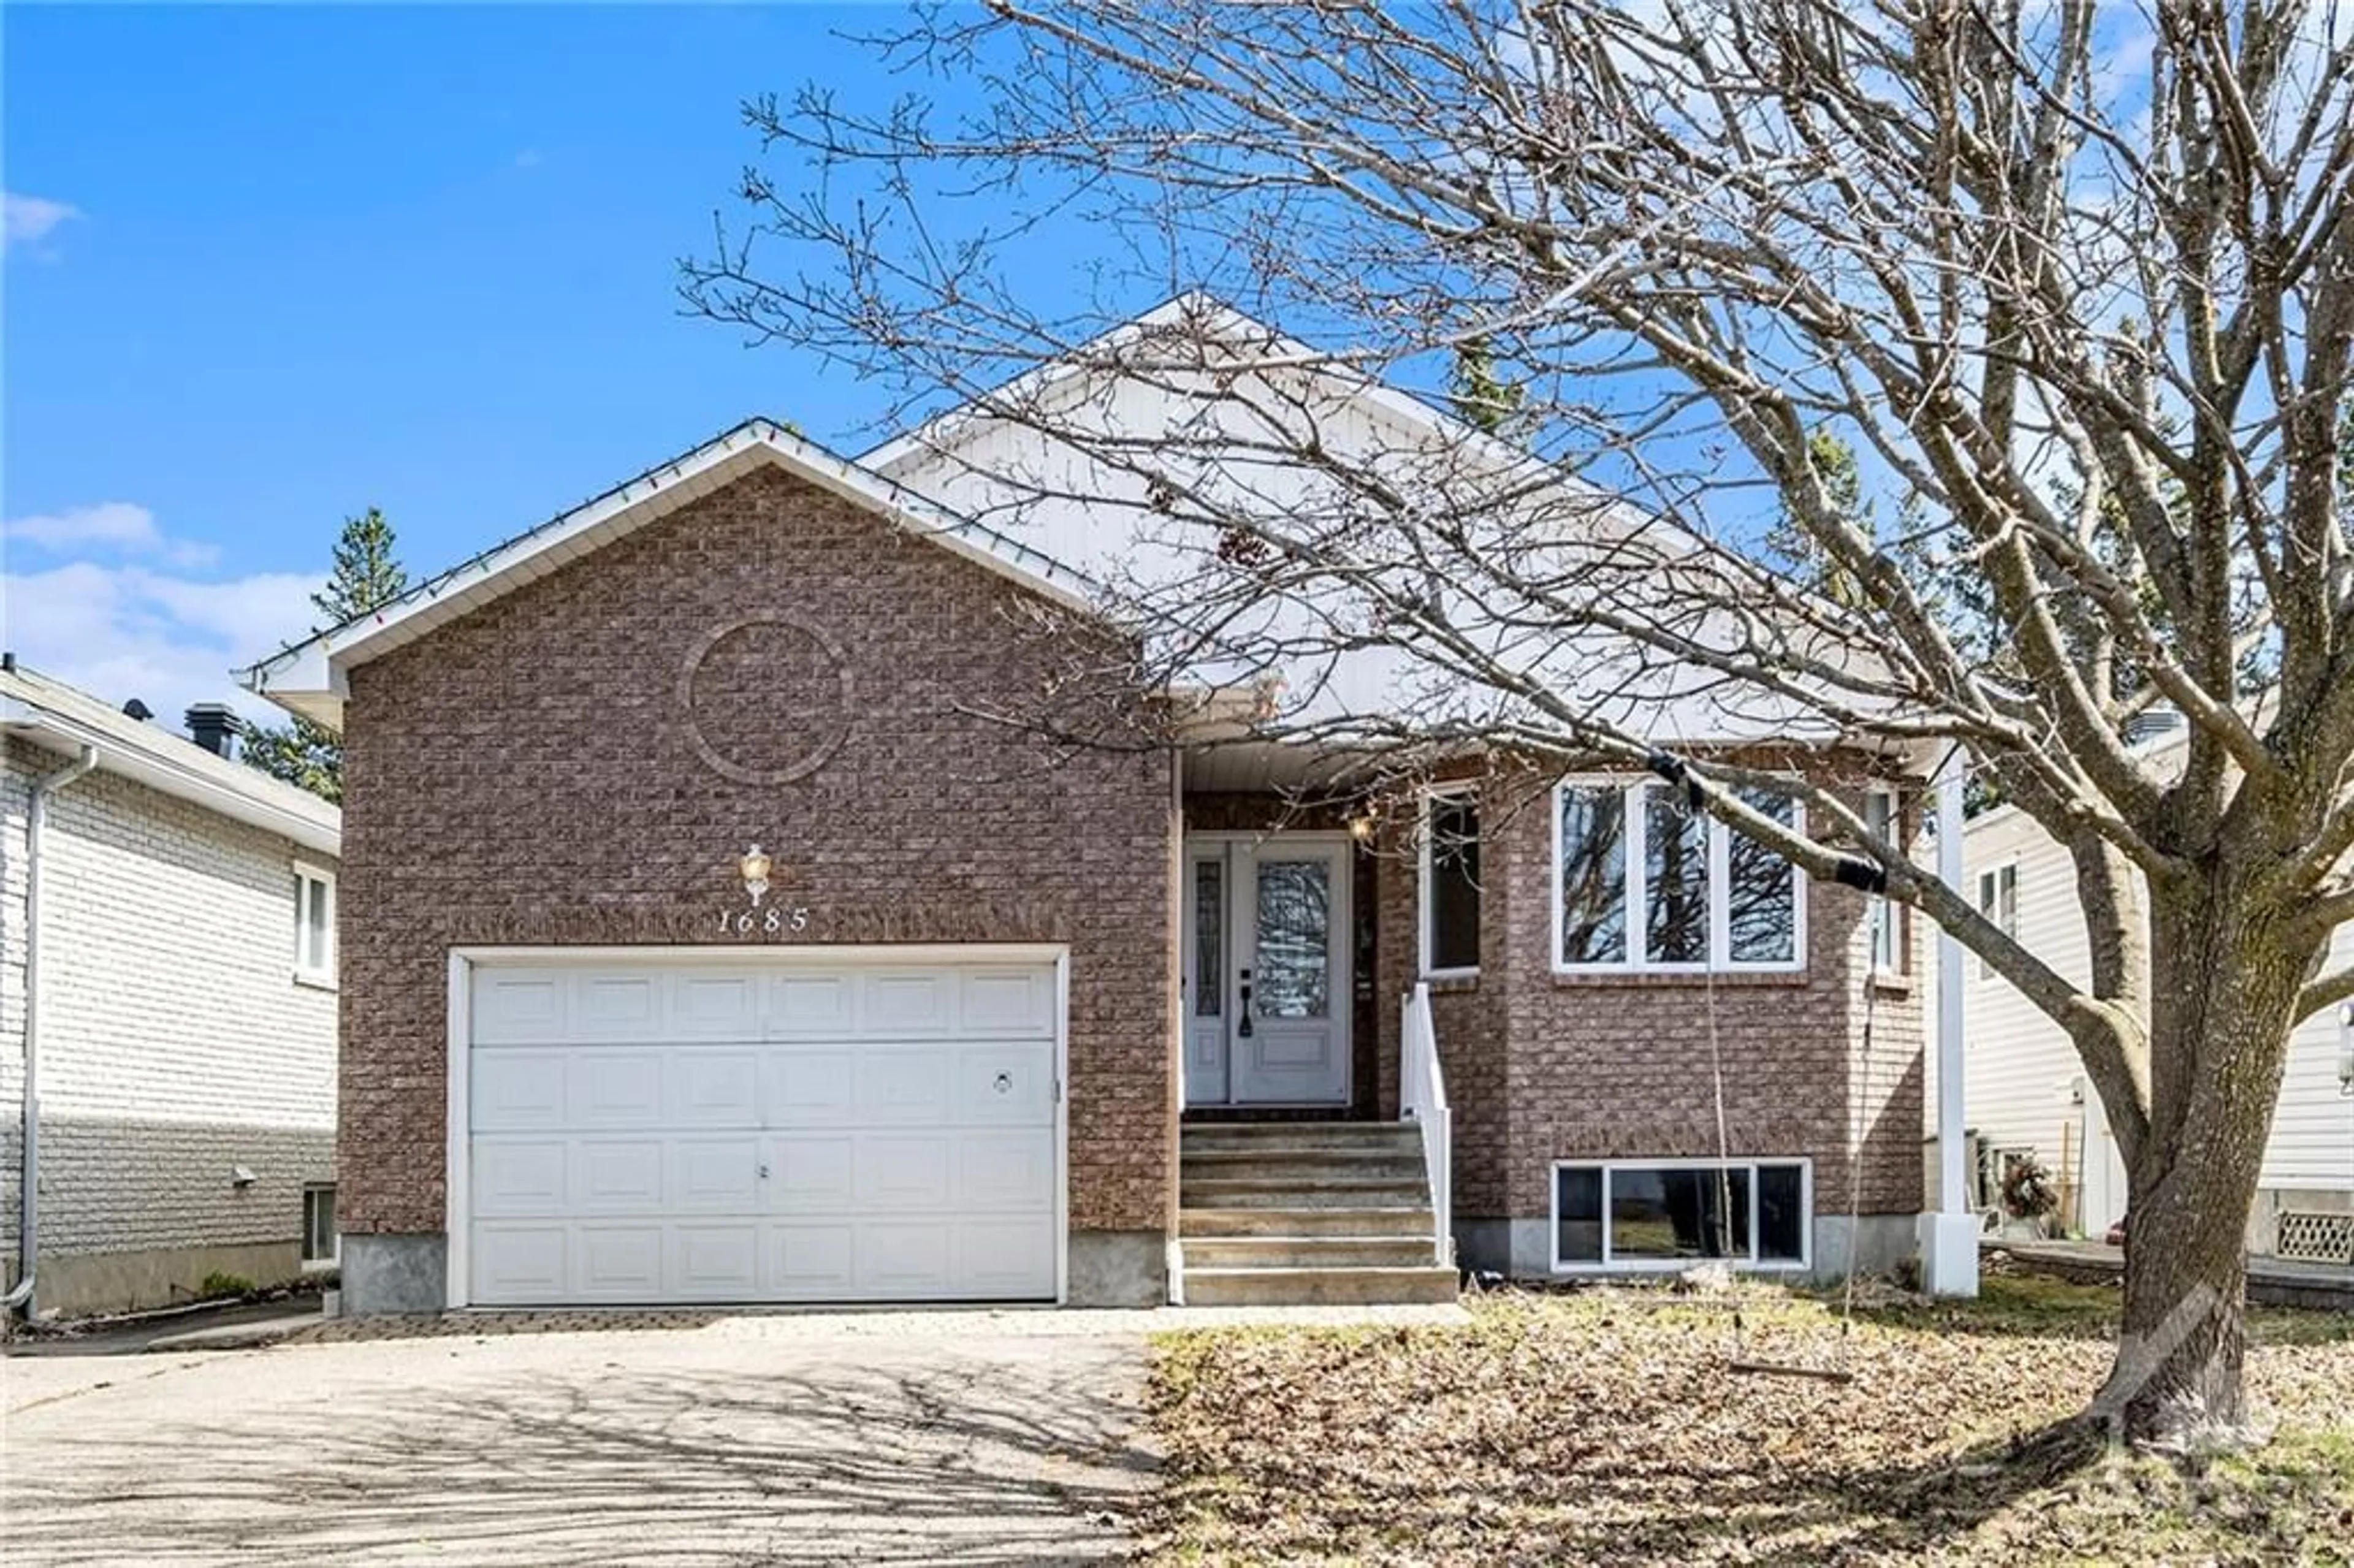 Home with brick exterior material for 1685 BELCOURT Blvd, Orleans Ontario K1C 1M3